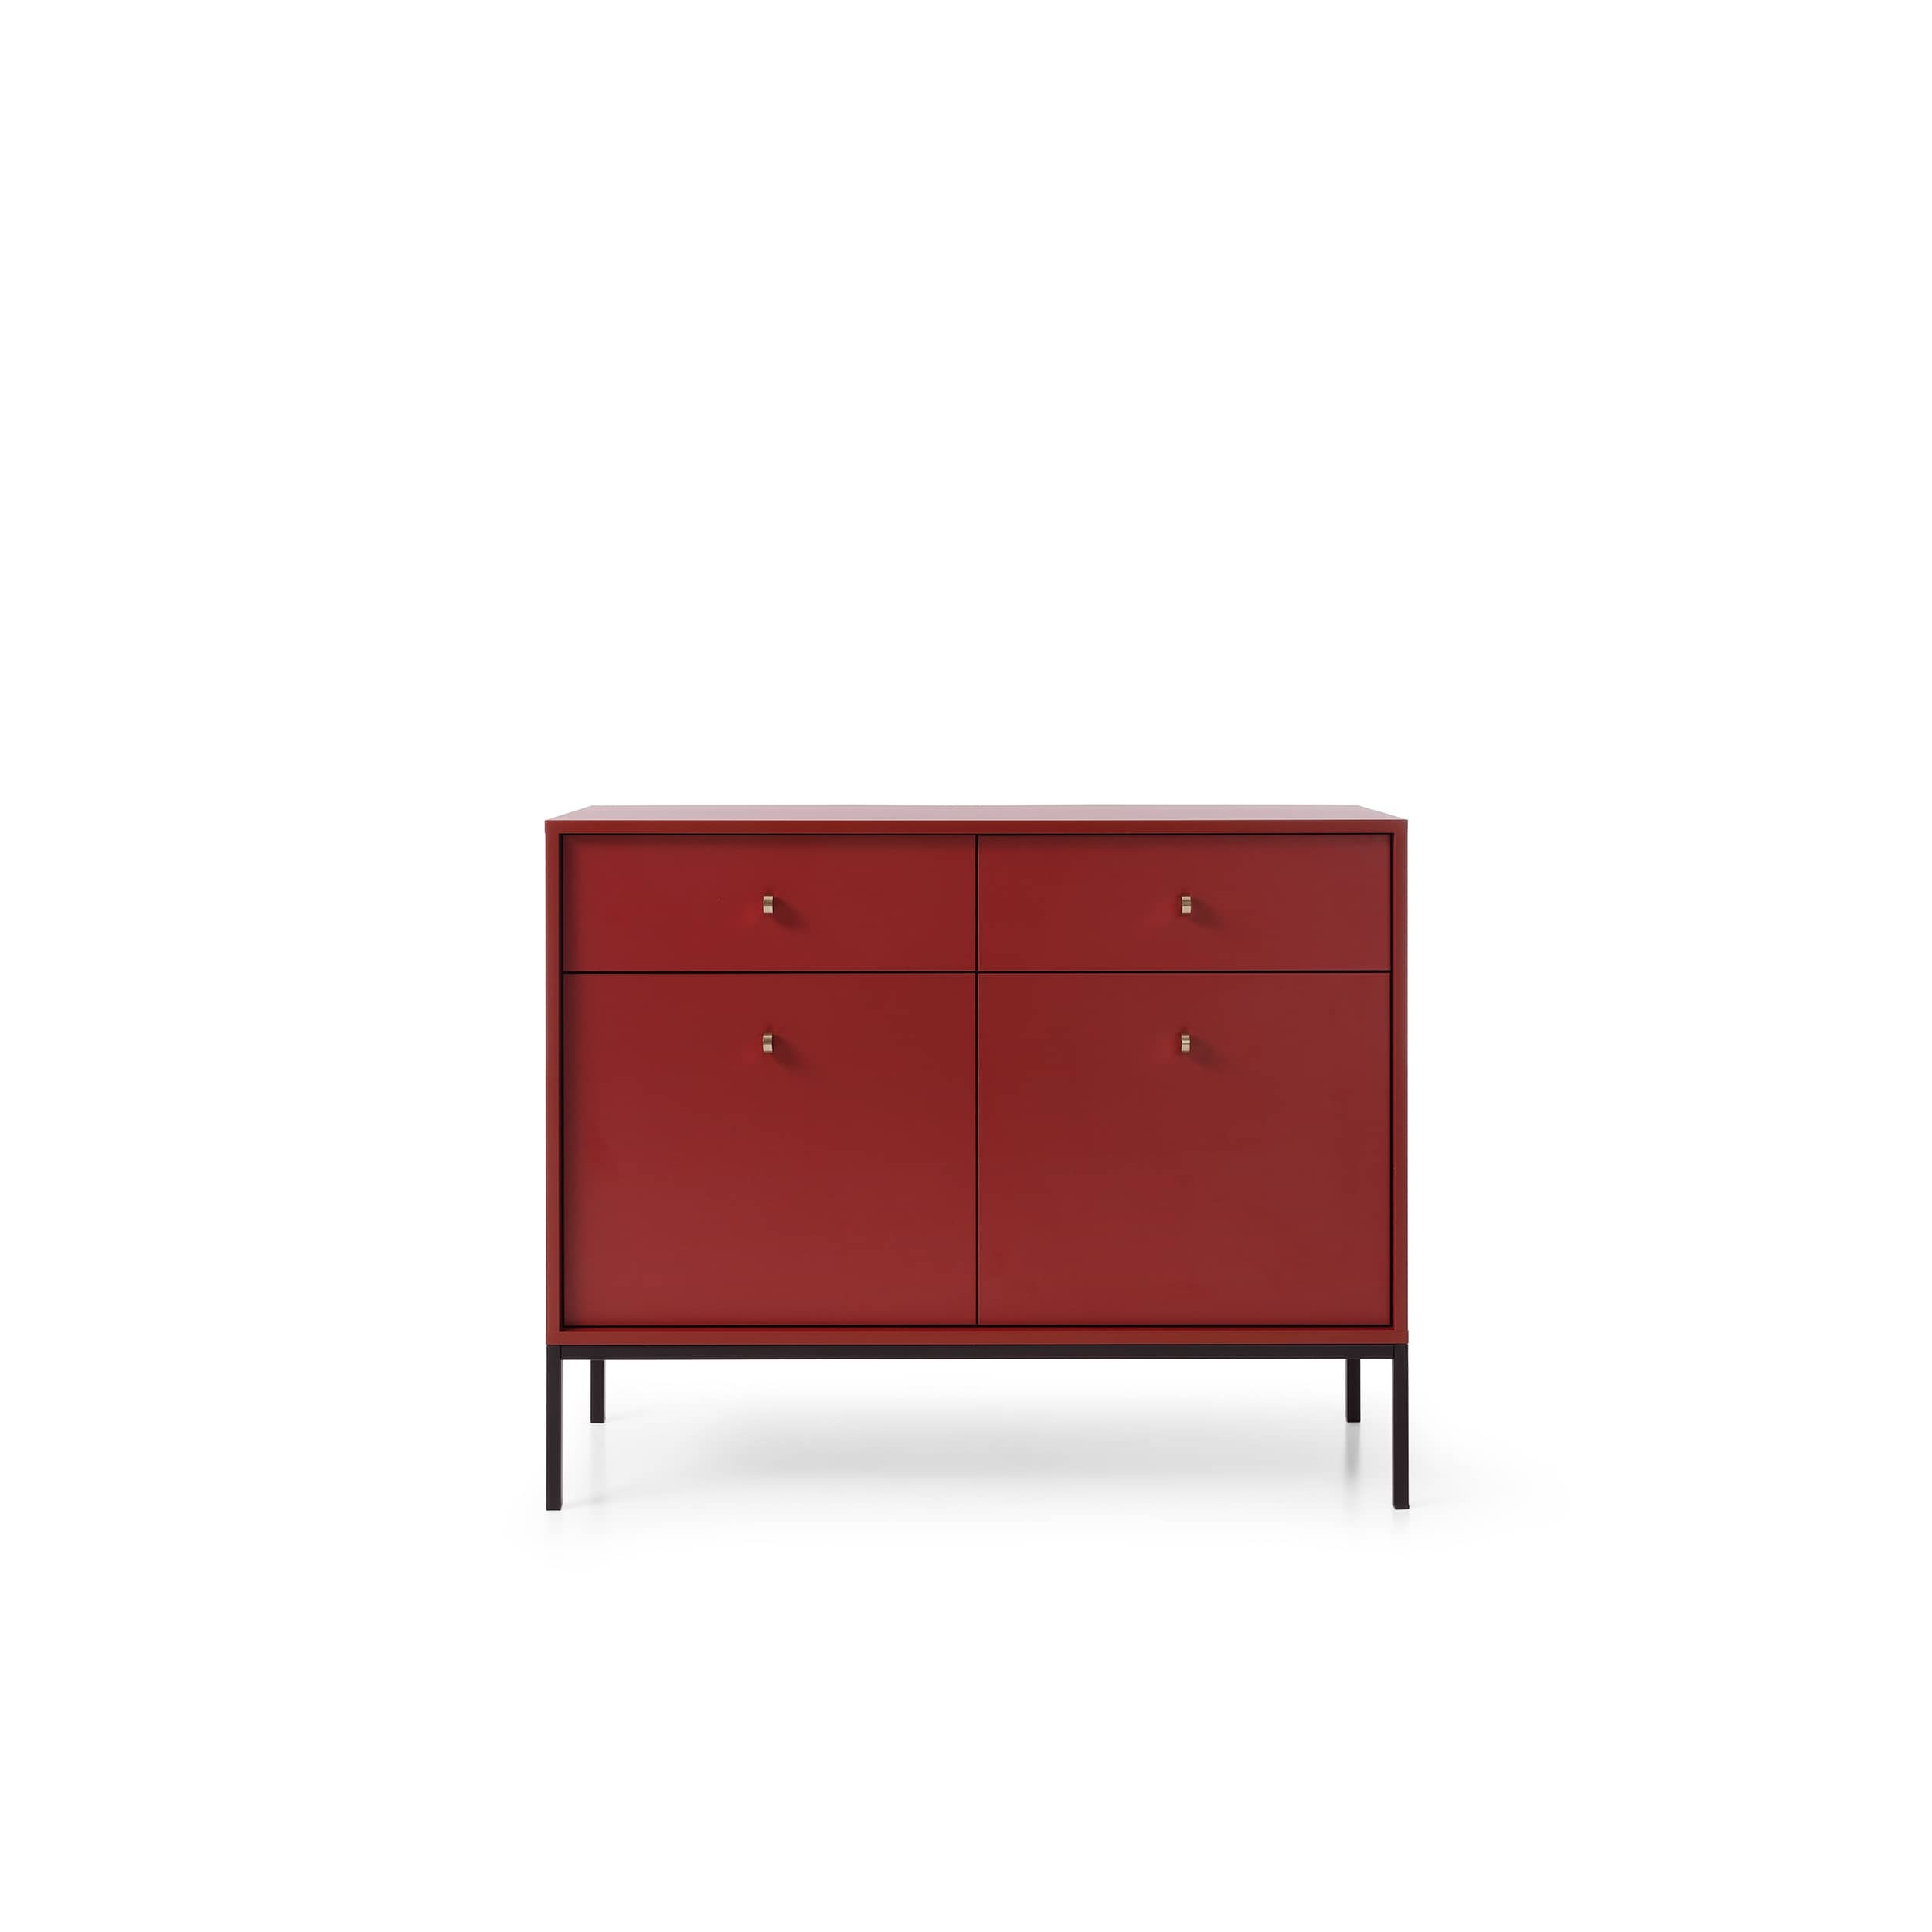 Mono Sideboard Cabinet 104cm - Red 104cm - image 1